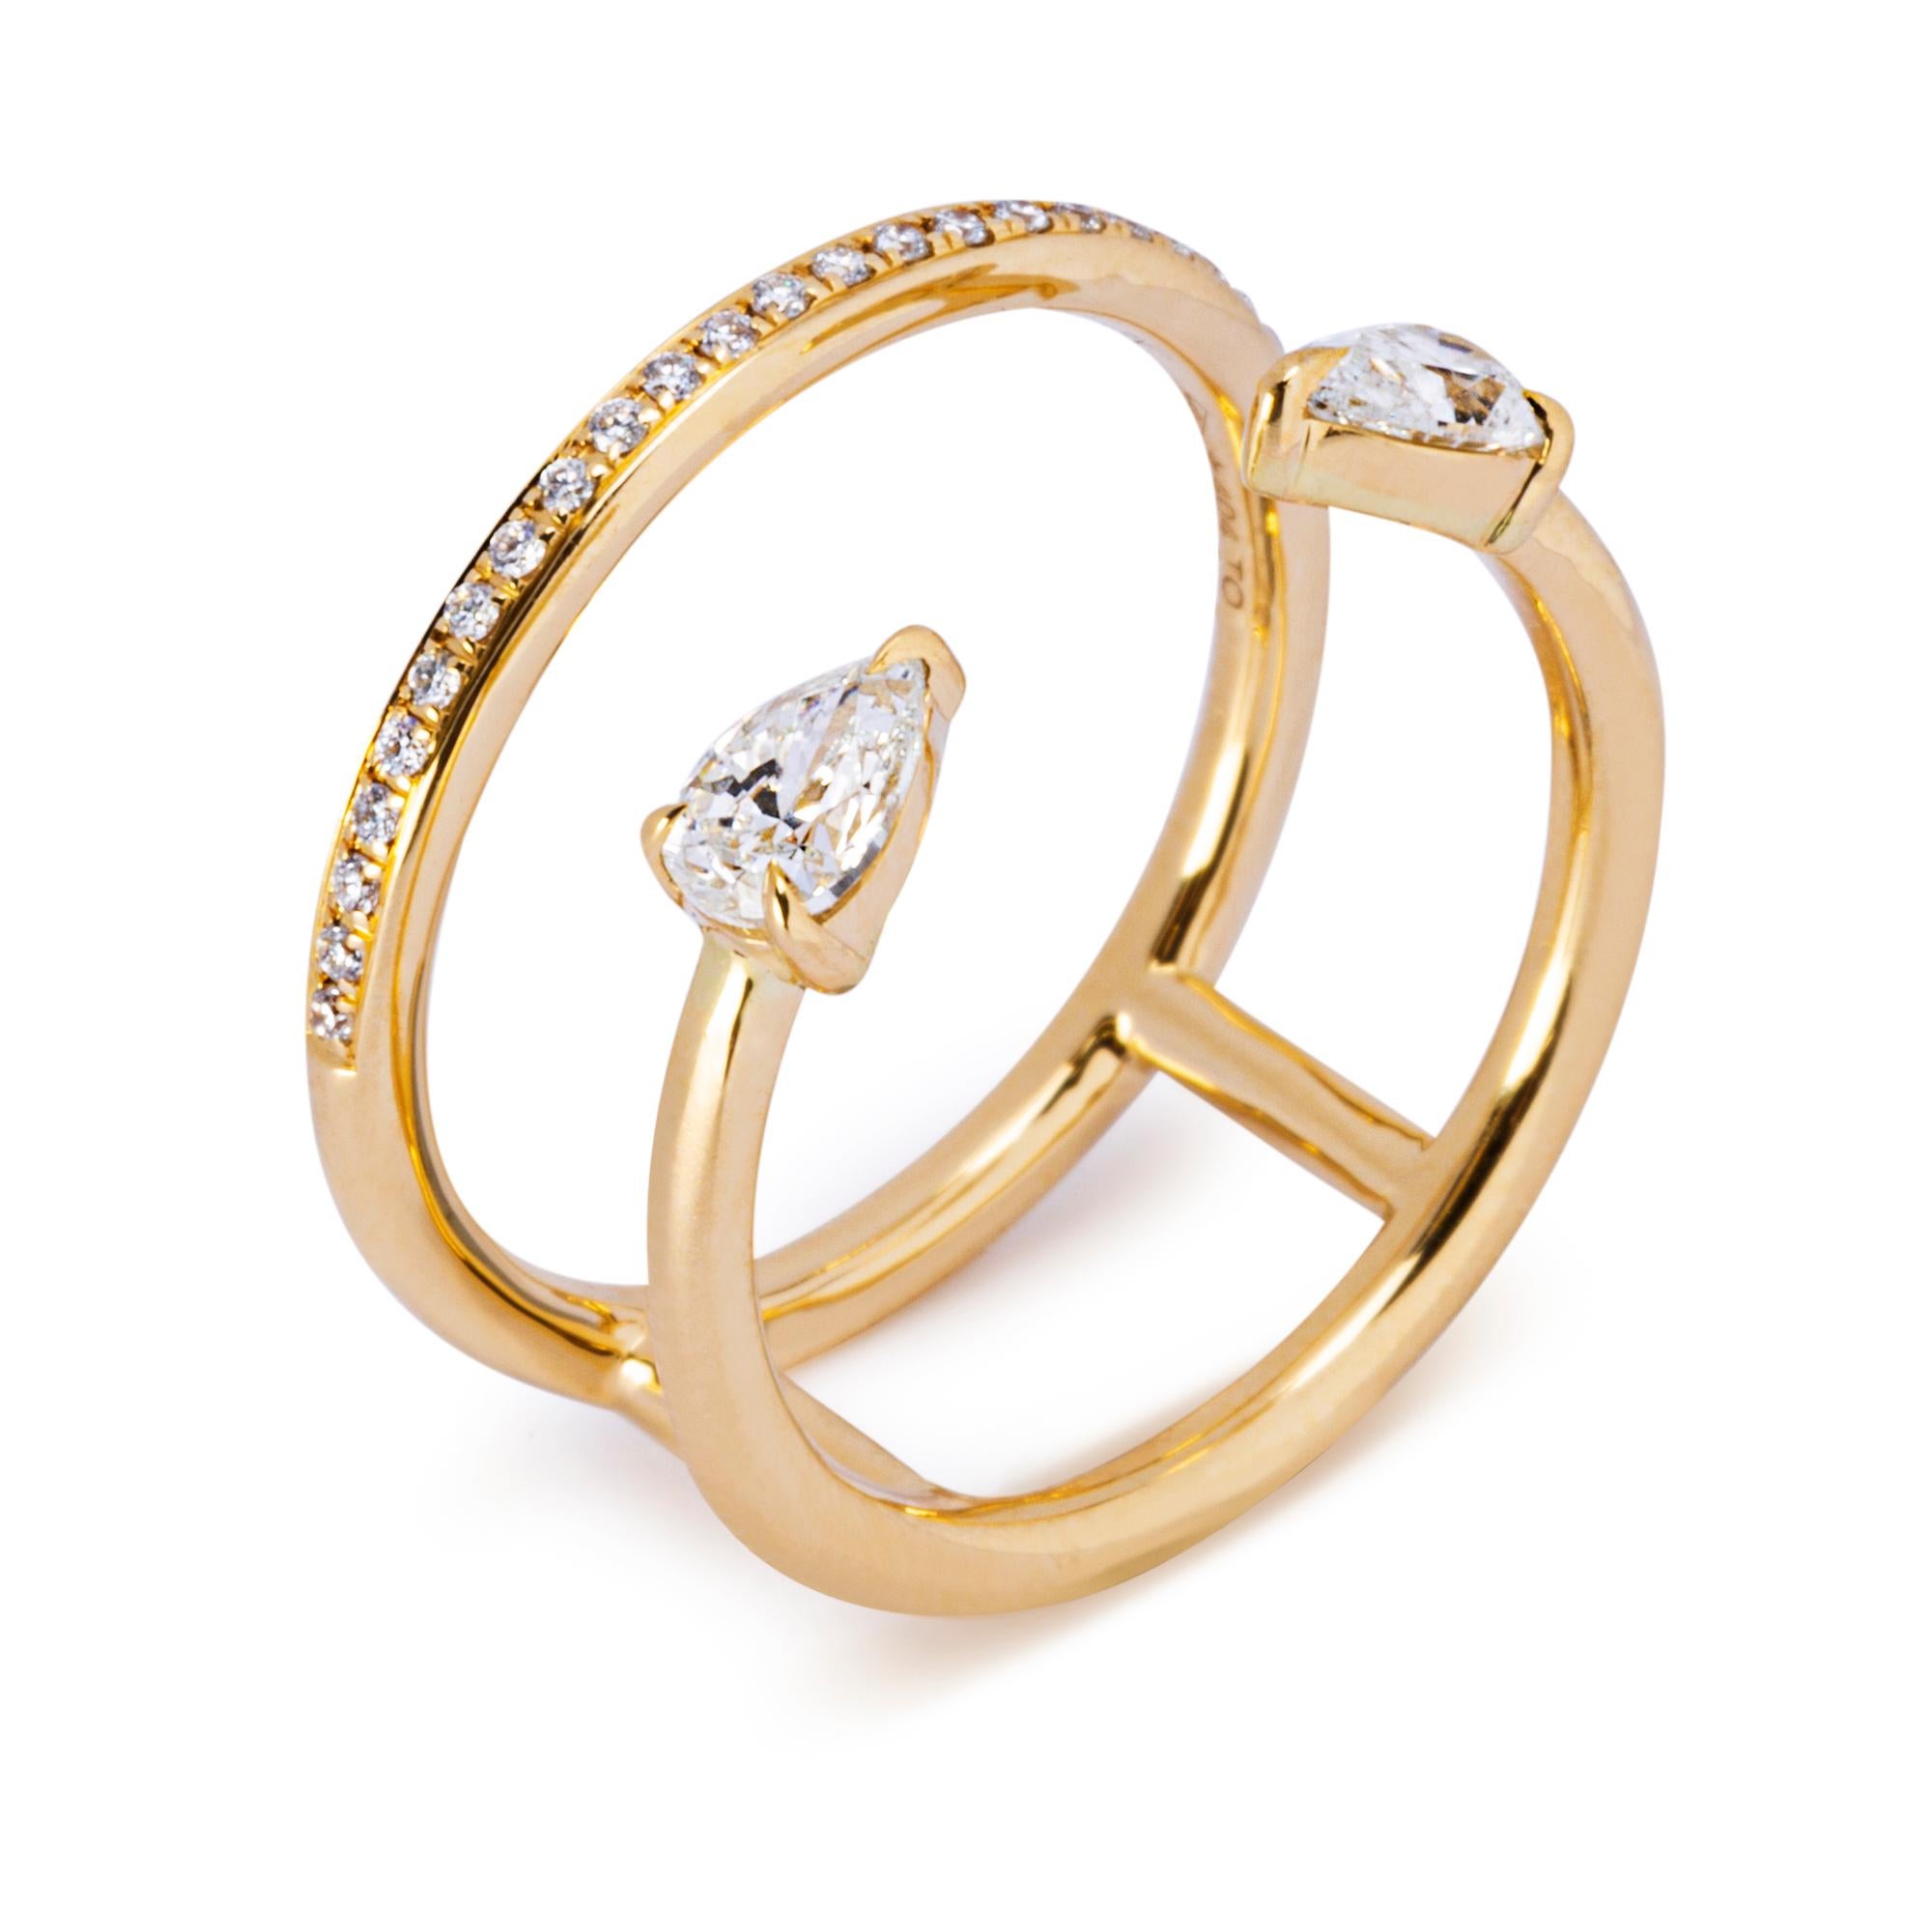 Alex Jona design collection, hand crafted in Italy, 18 Karat yellow gold double open ring band, set with two pear cut diamonds weighing 0.63 carats. The shoulder is set with white diamonds, F color, VVS1 clarity, weighing 0.96 
Alex Jona jewels